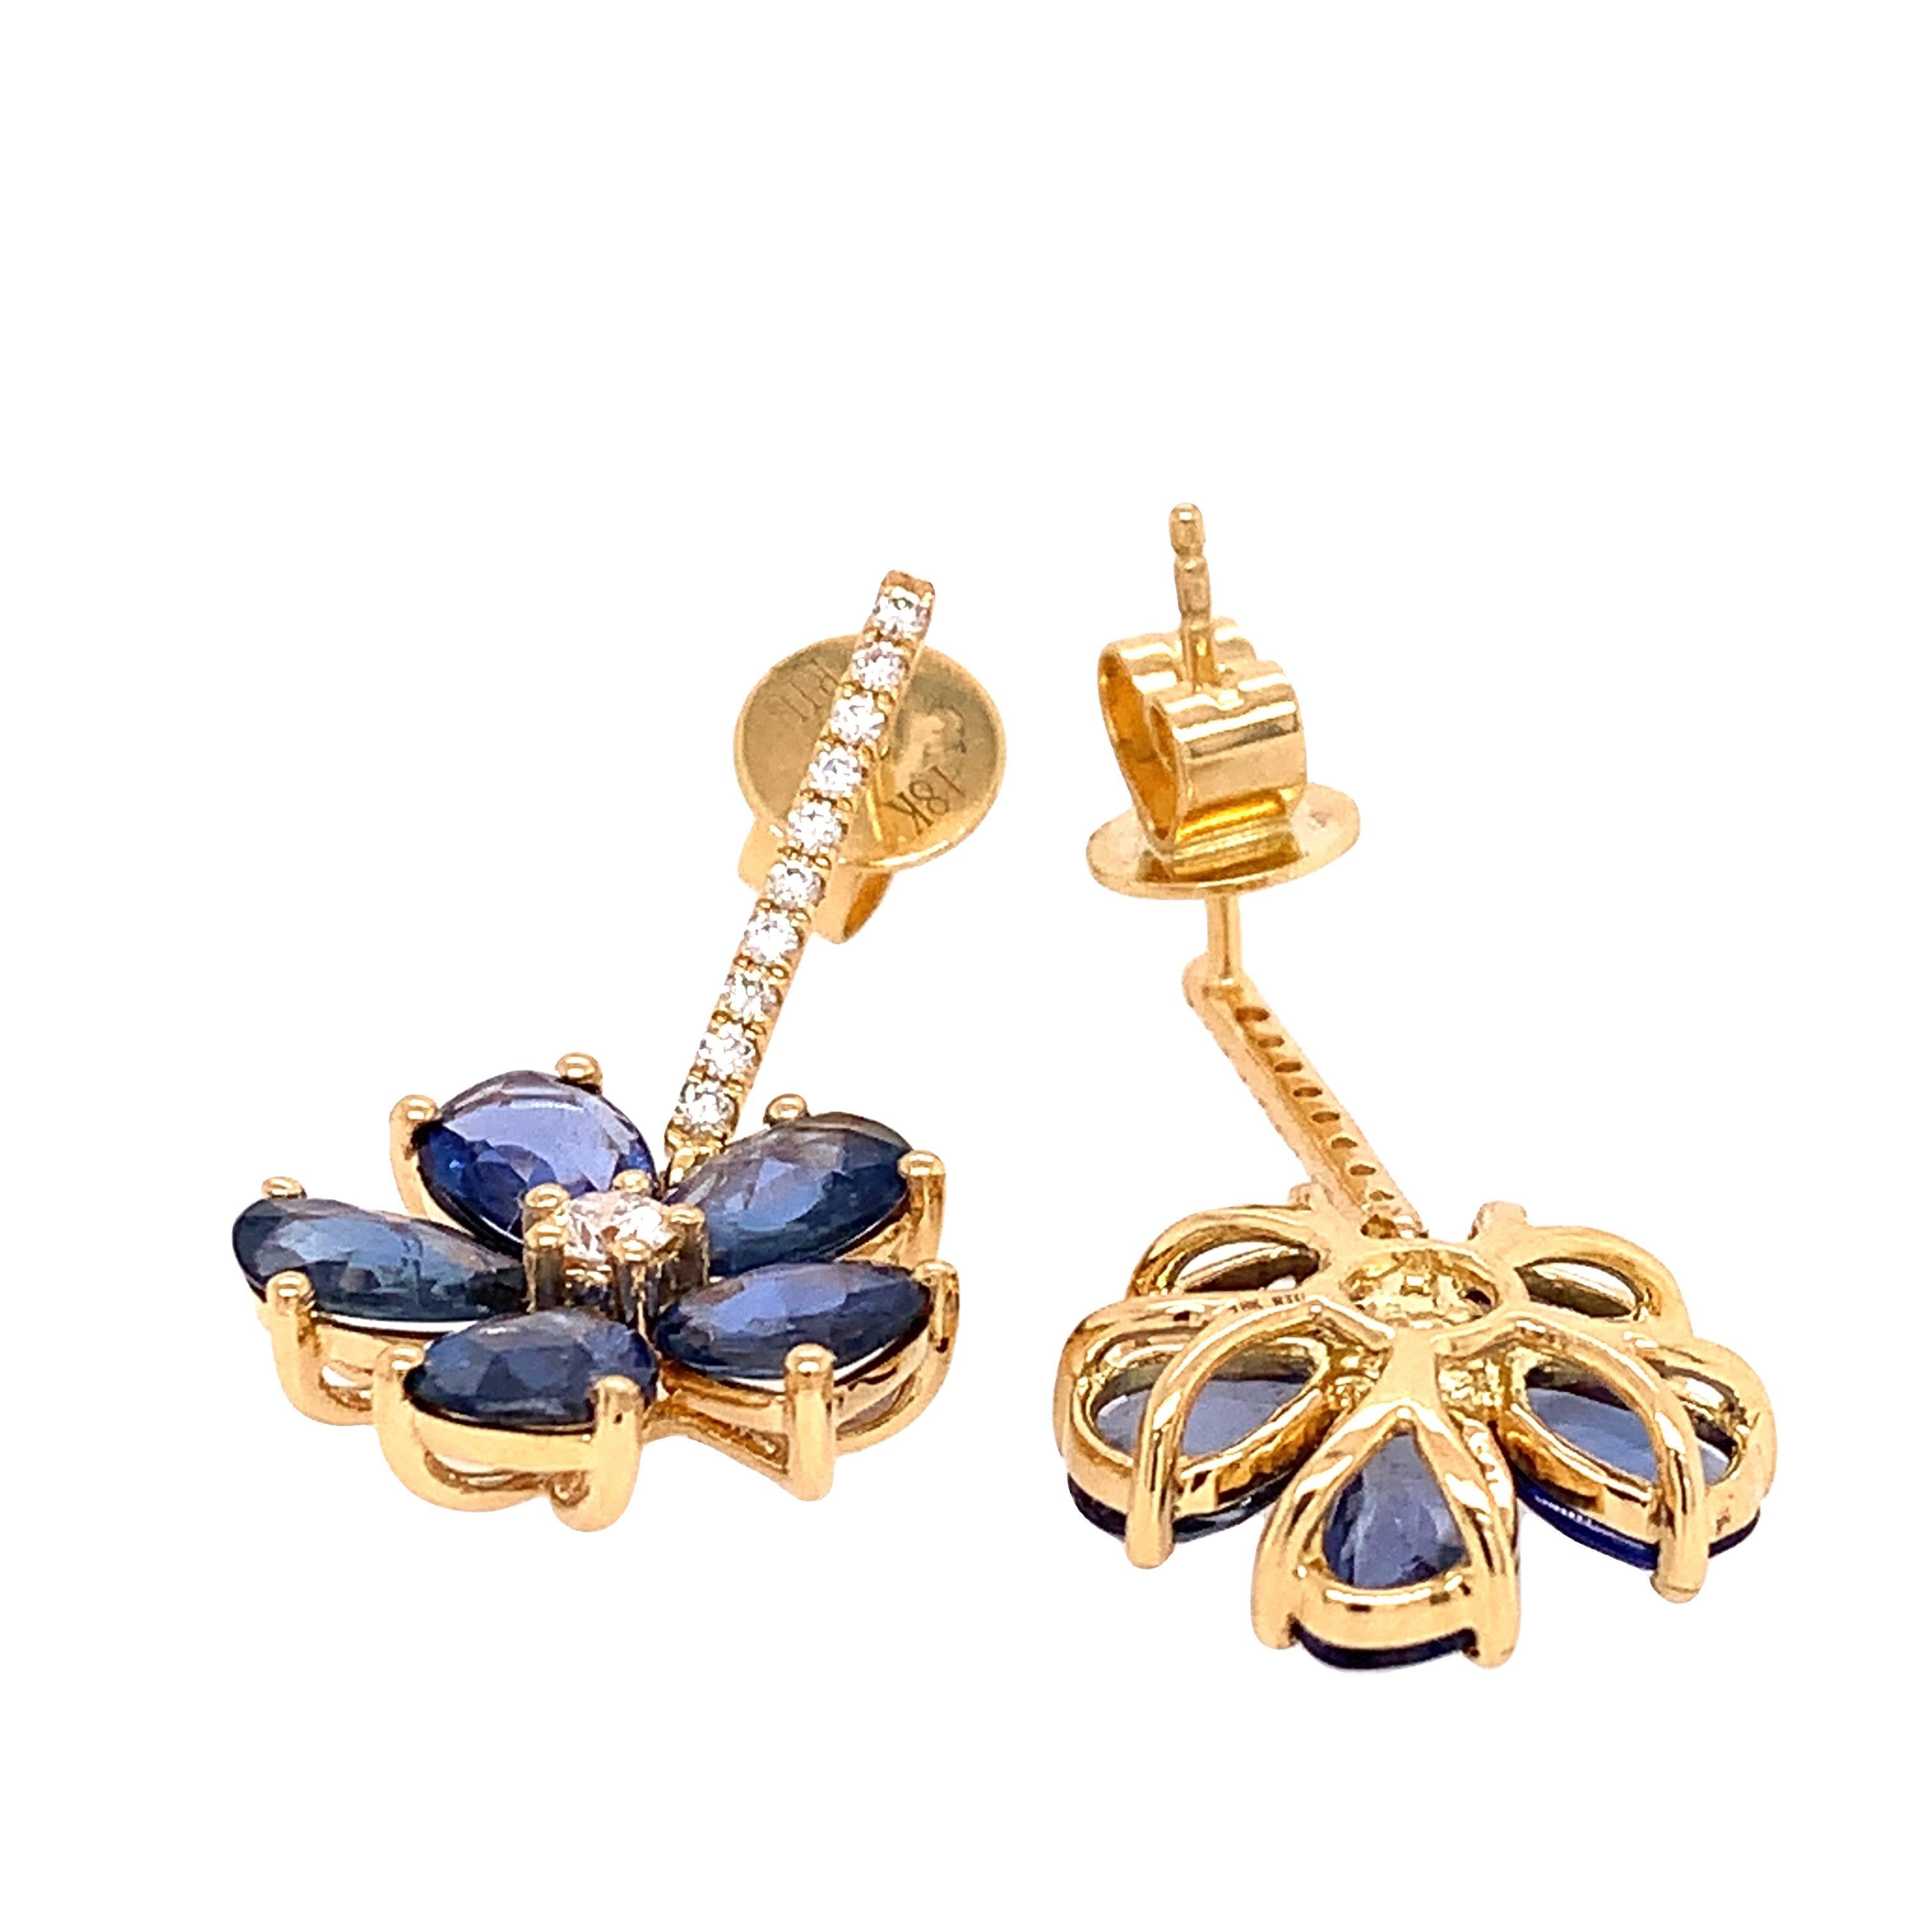 Skylight Collection

Blue Sapphire with diamonds featuring as flower shape dangling earrings set in 18K yellow gold.

Blue Sapphire: 4.94ct total weight
Diamond: 0.34ct total weight
All diamonds are G-H/SI stones.